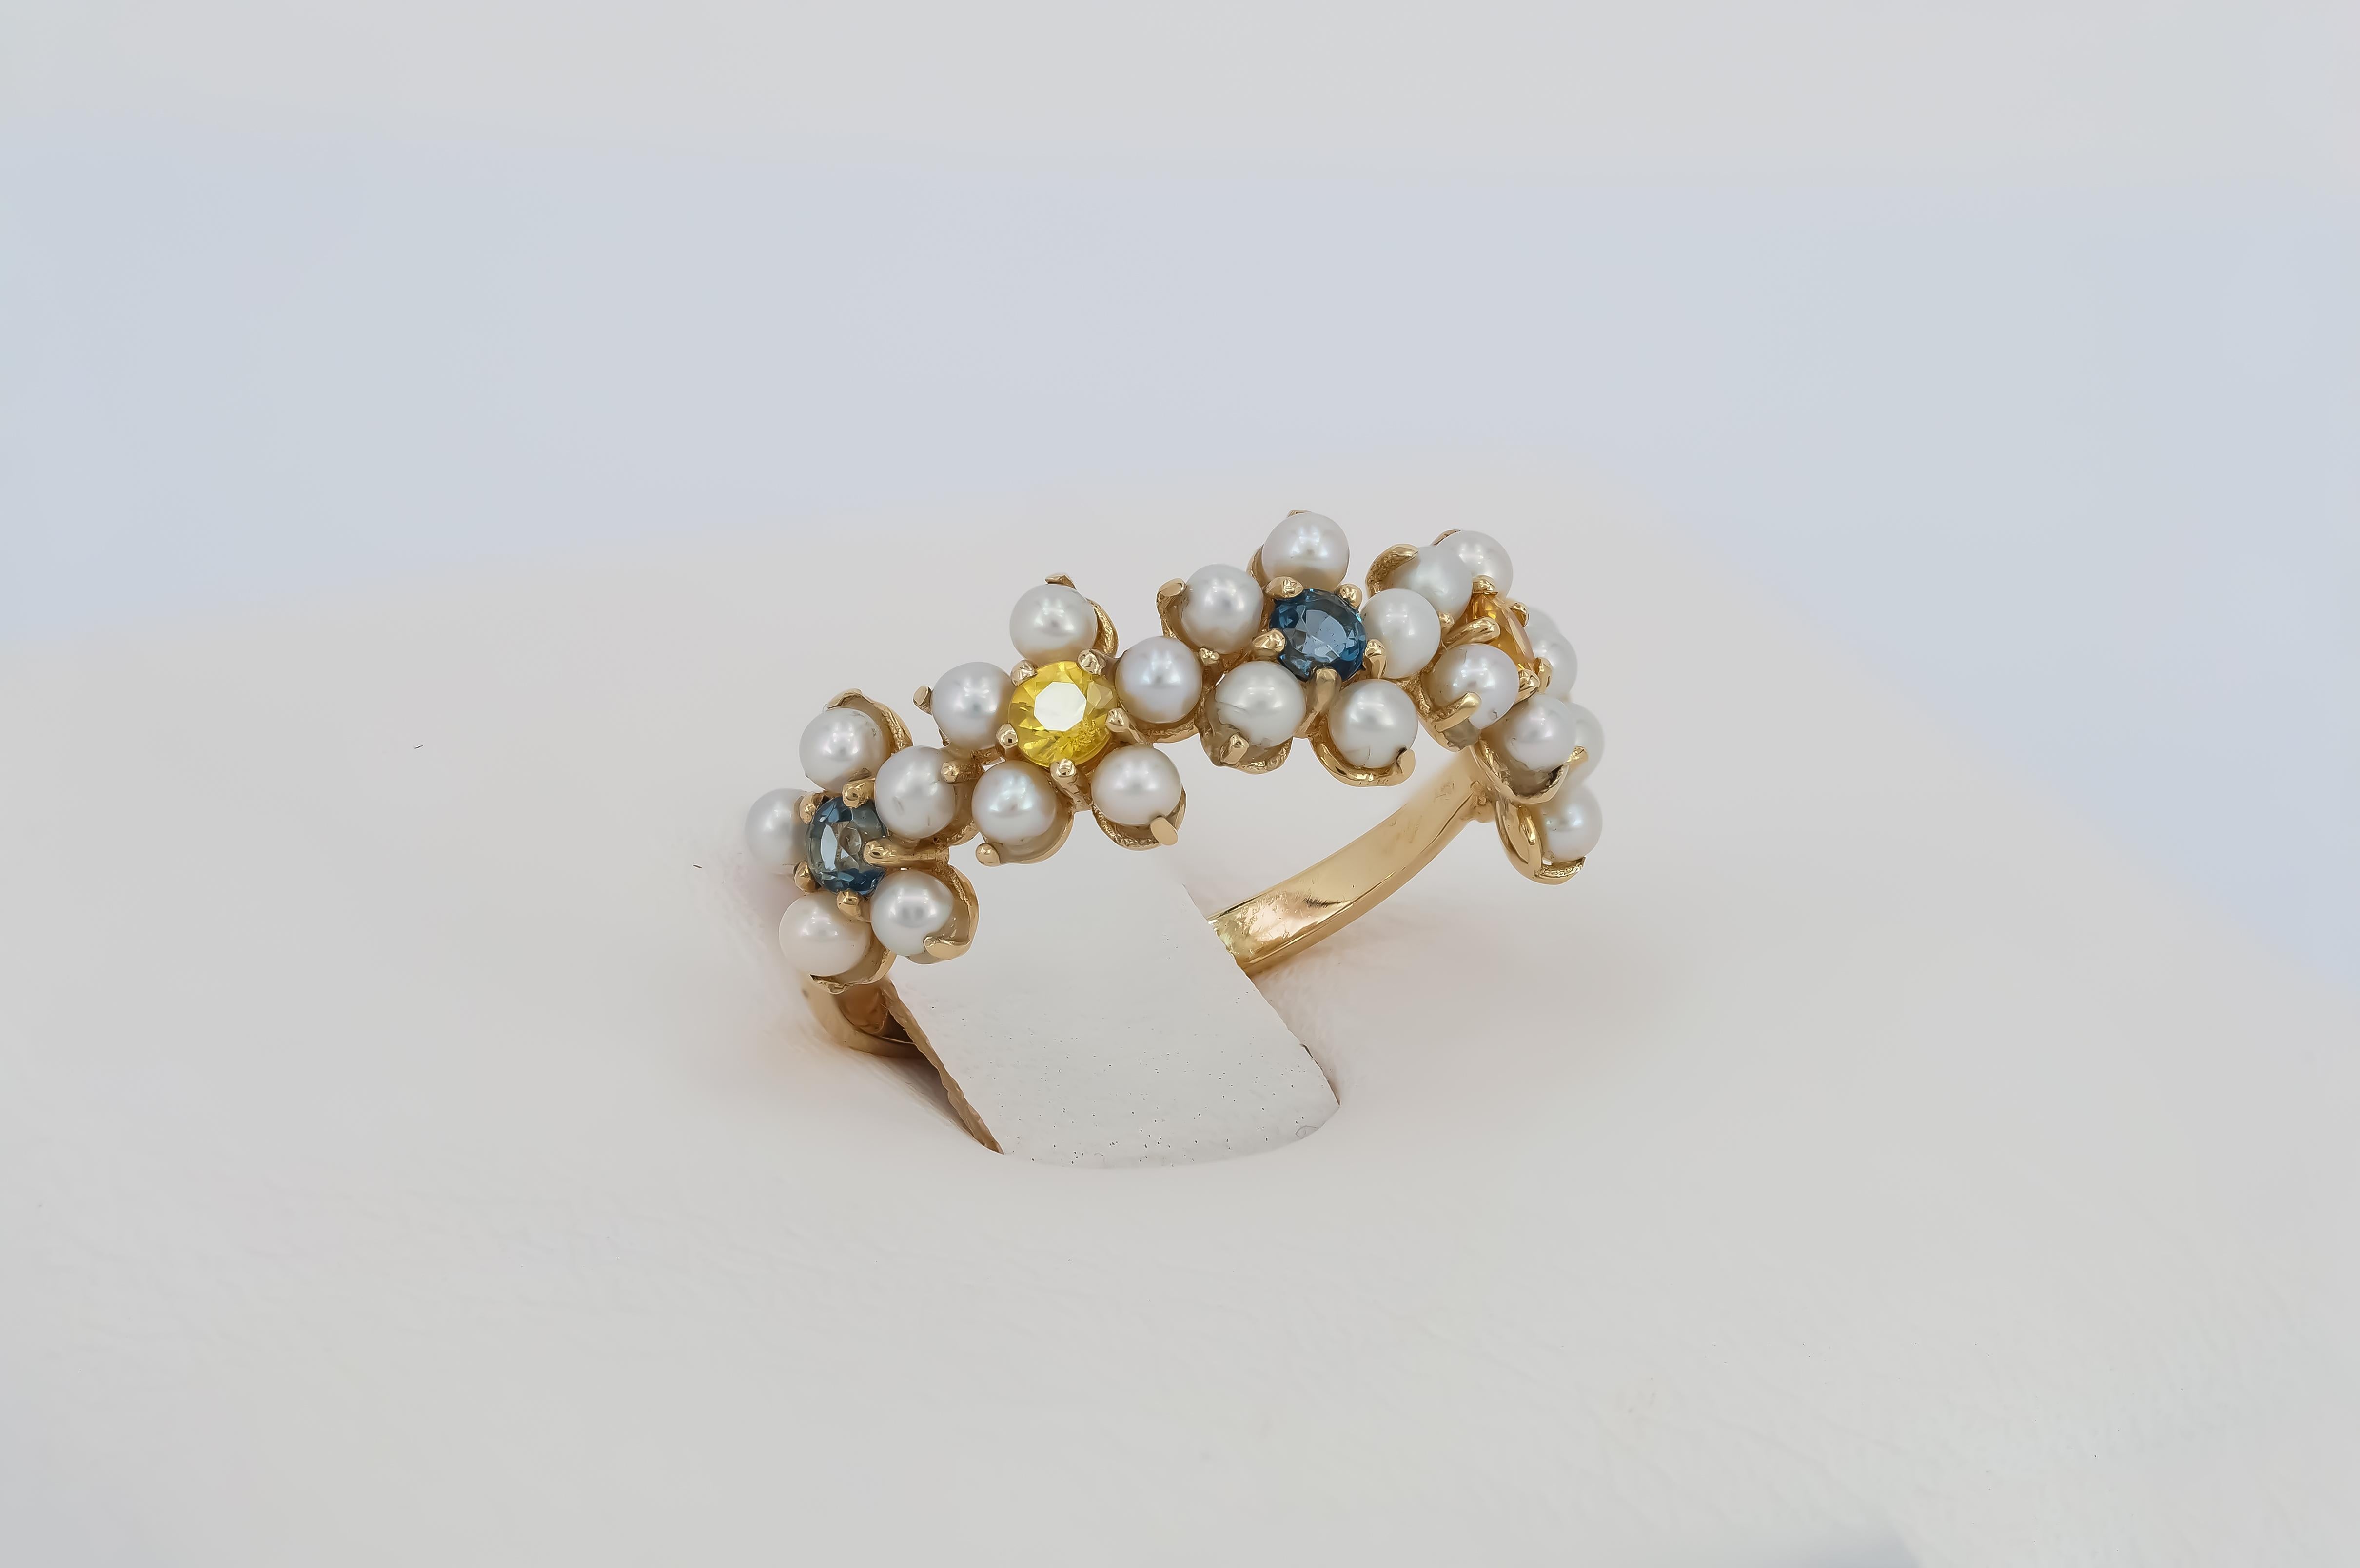 Women's Daisy gold ring with sapphires, pearls.  For Sale